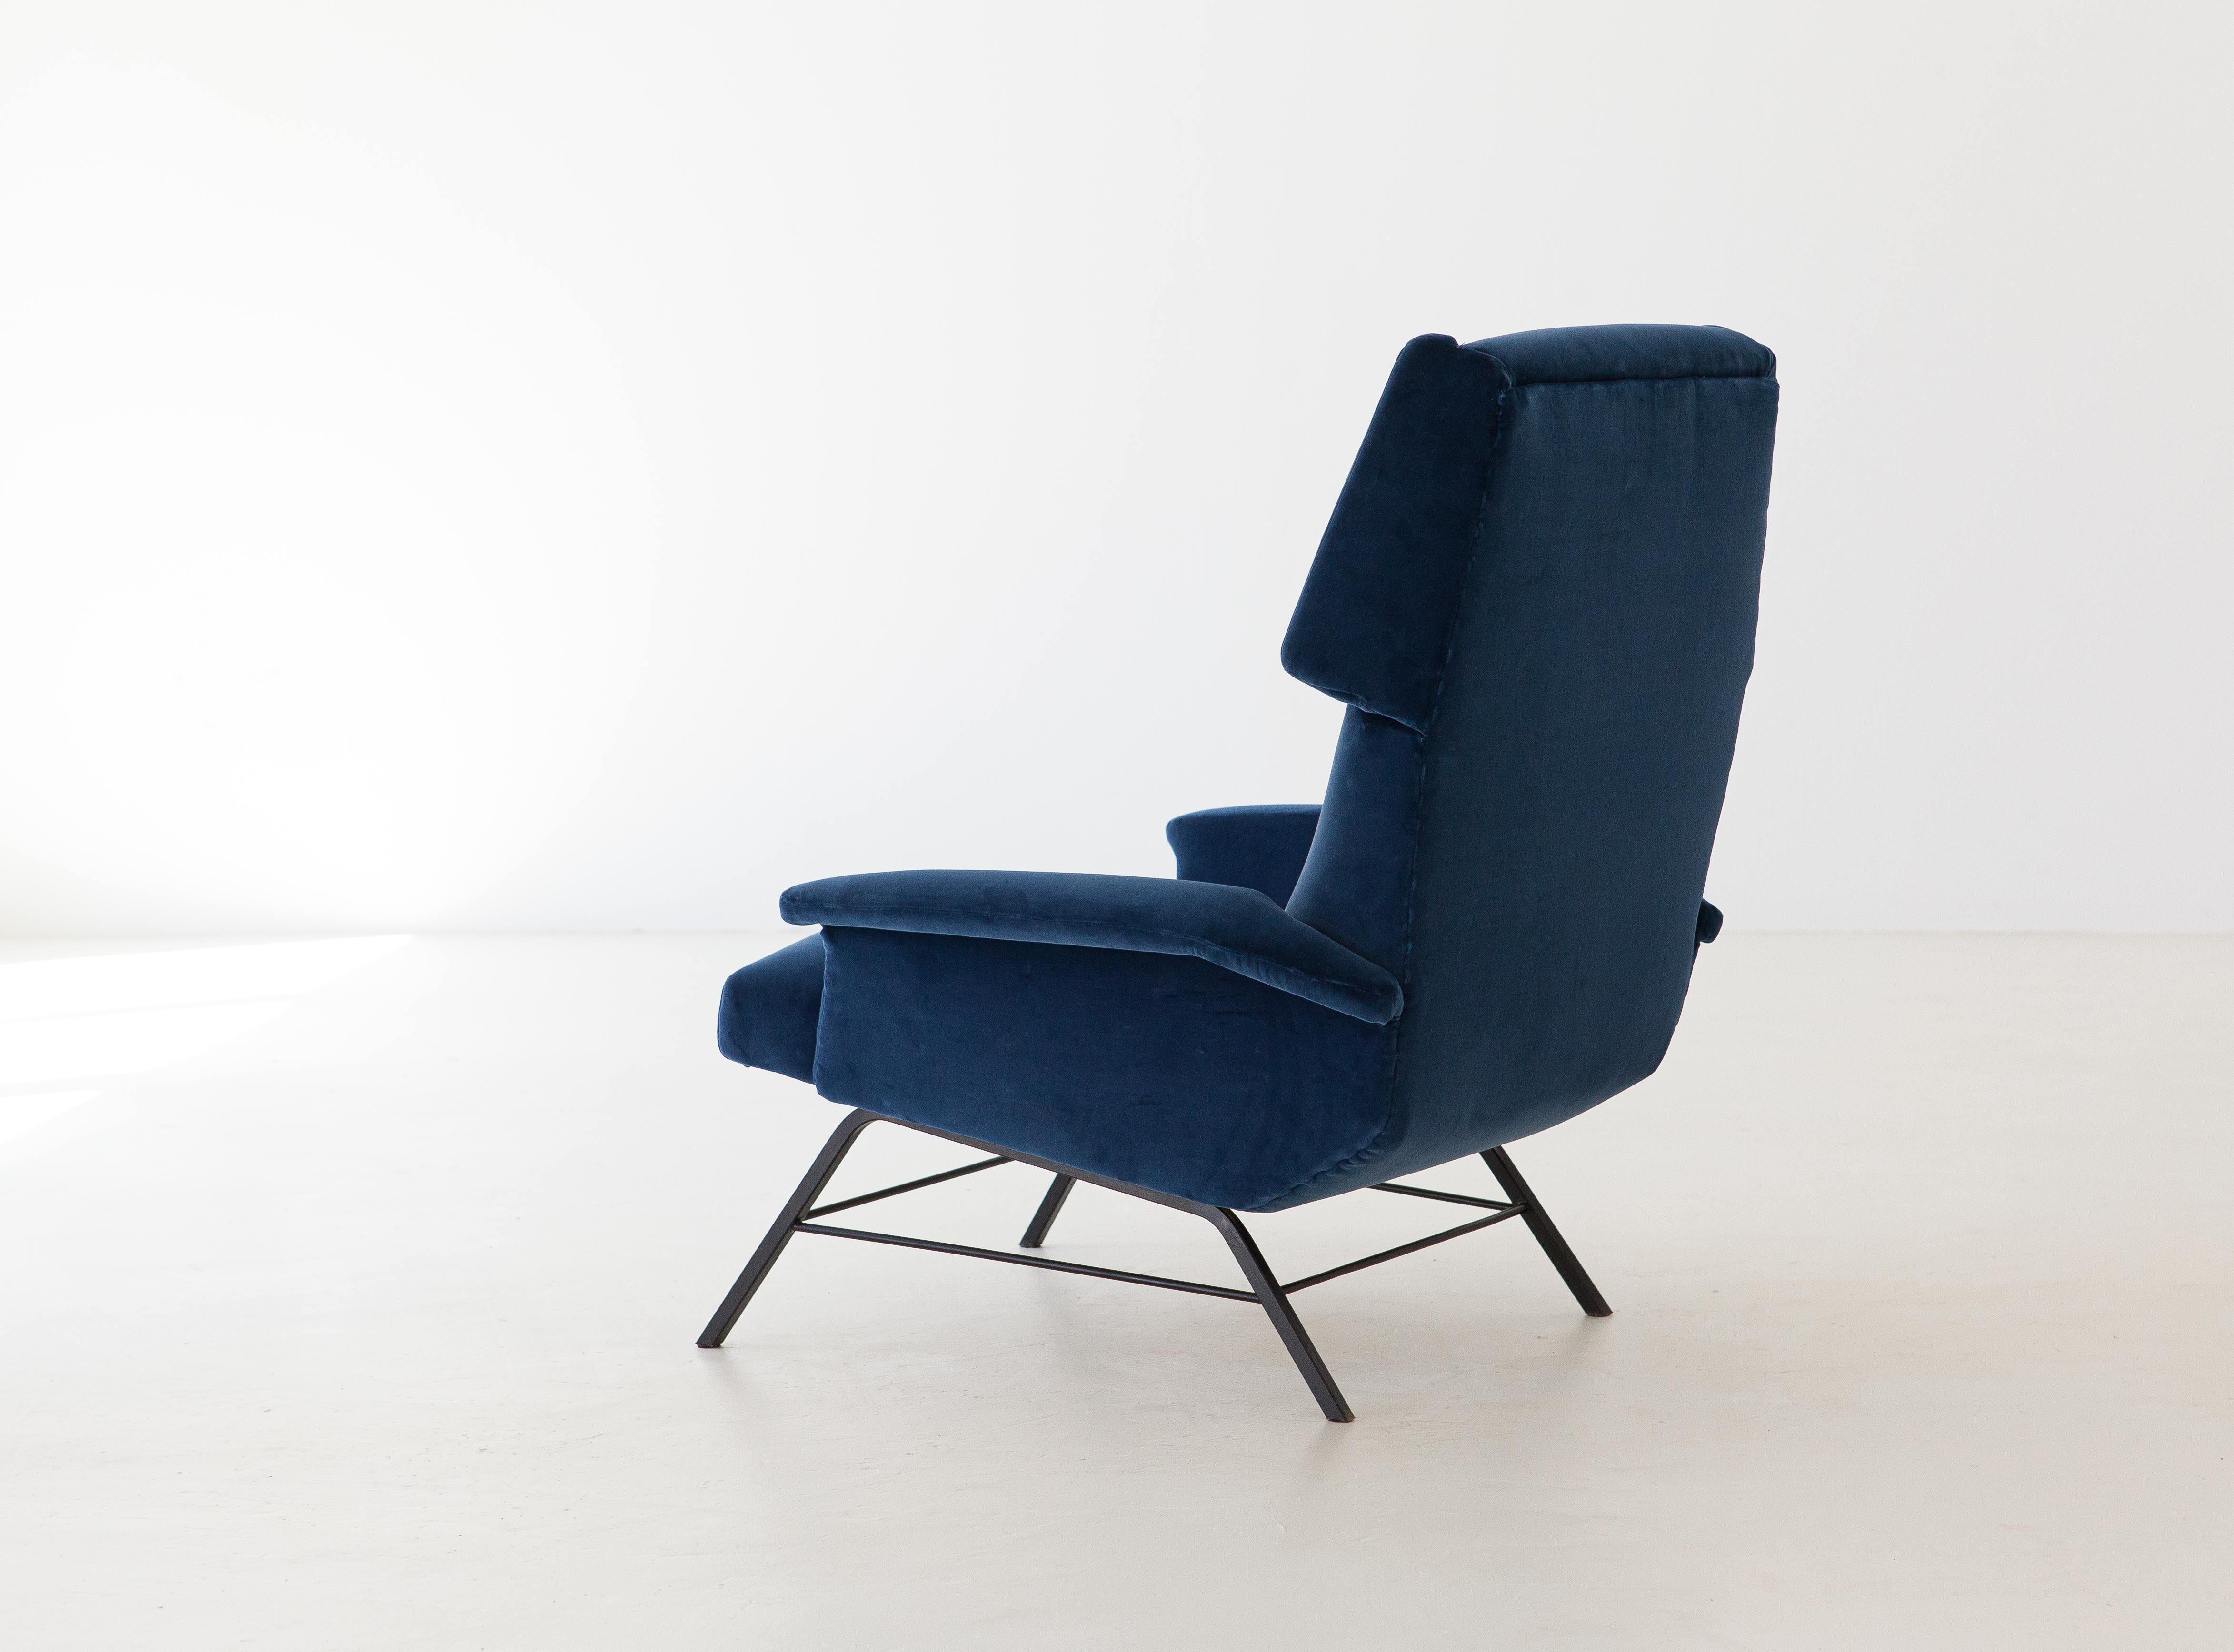 A Mid-Century Modern lounge chair with armrests and headrest ears manufactured in Italy during the 1950s

Completely renoved with new black enamel on the iron legs frame and new blue cotton velvet upholstery, also the padding is new.

Minimal